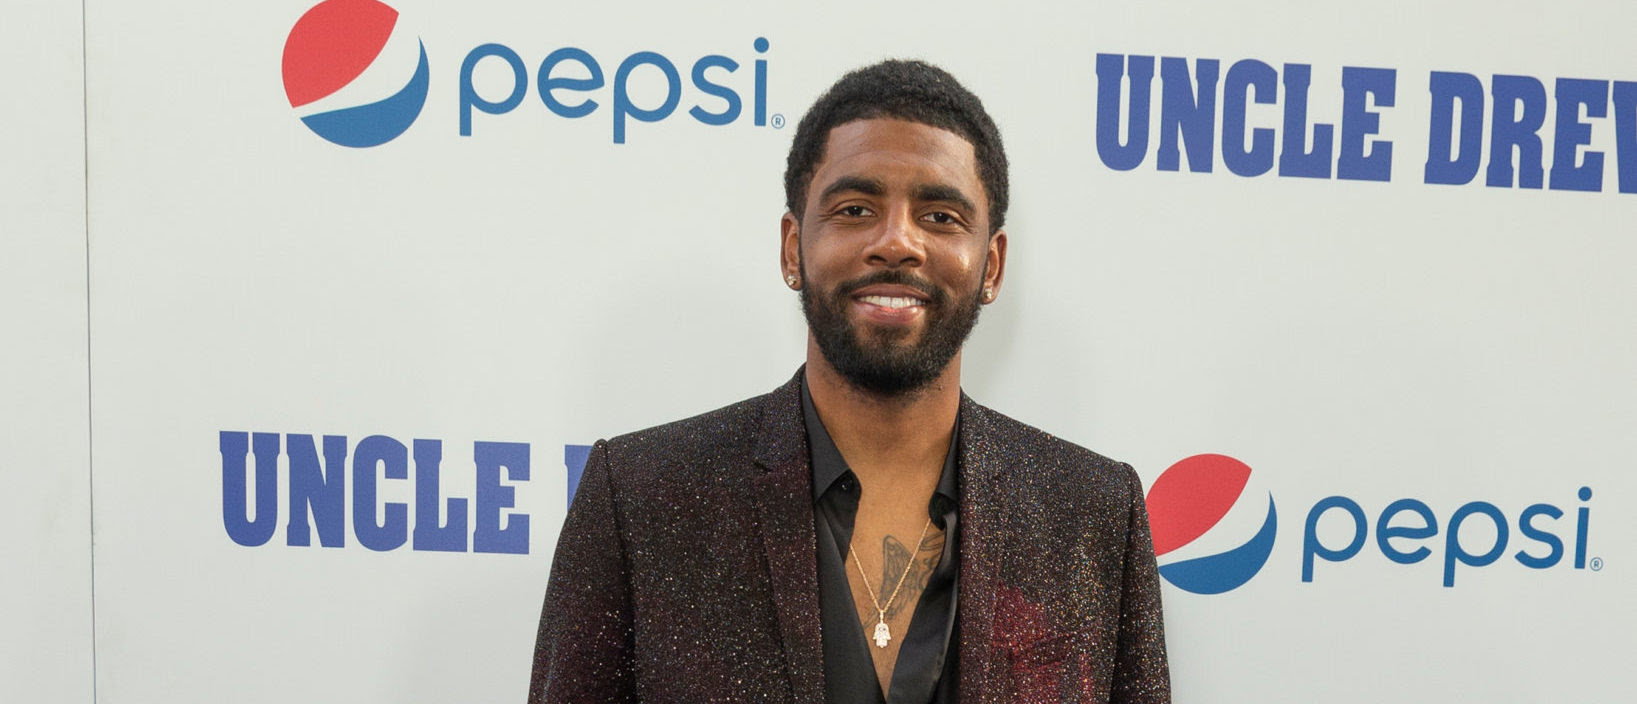 REPORT: Kyrie Irving Loses It Over Racism, Drugs, OnlyFans During Livestream